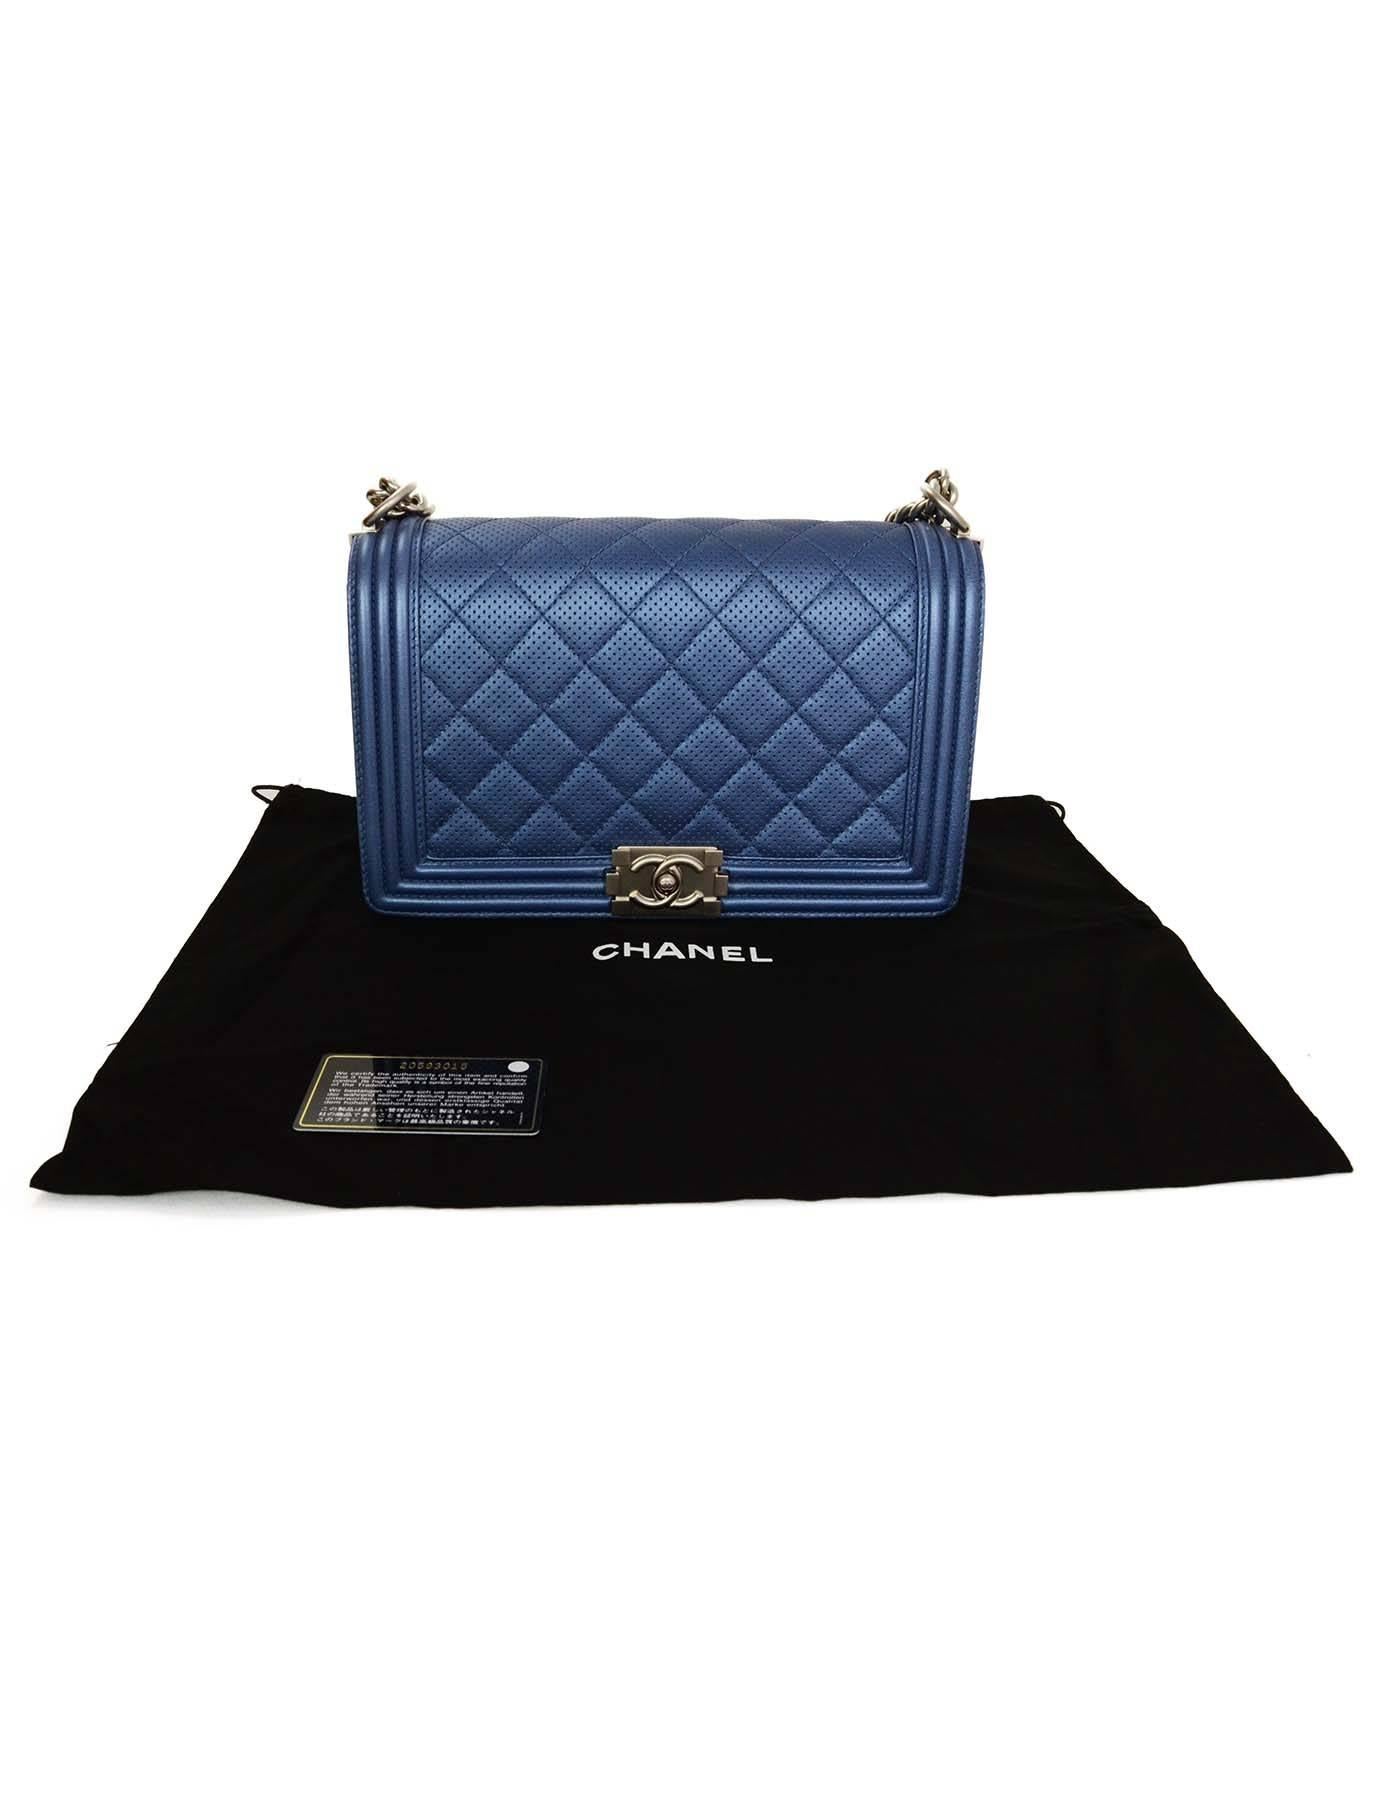 Chanel Metallic Blue Perforated Quilted New Medium Boy Bag SHW rt. $5, 200 1